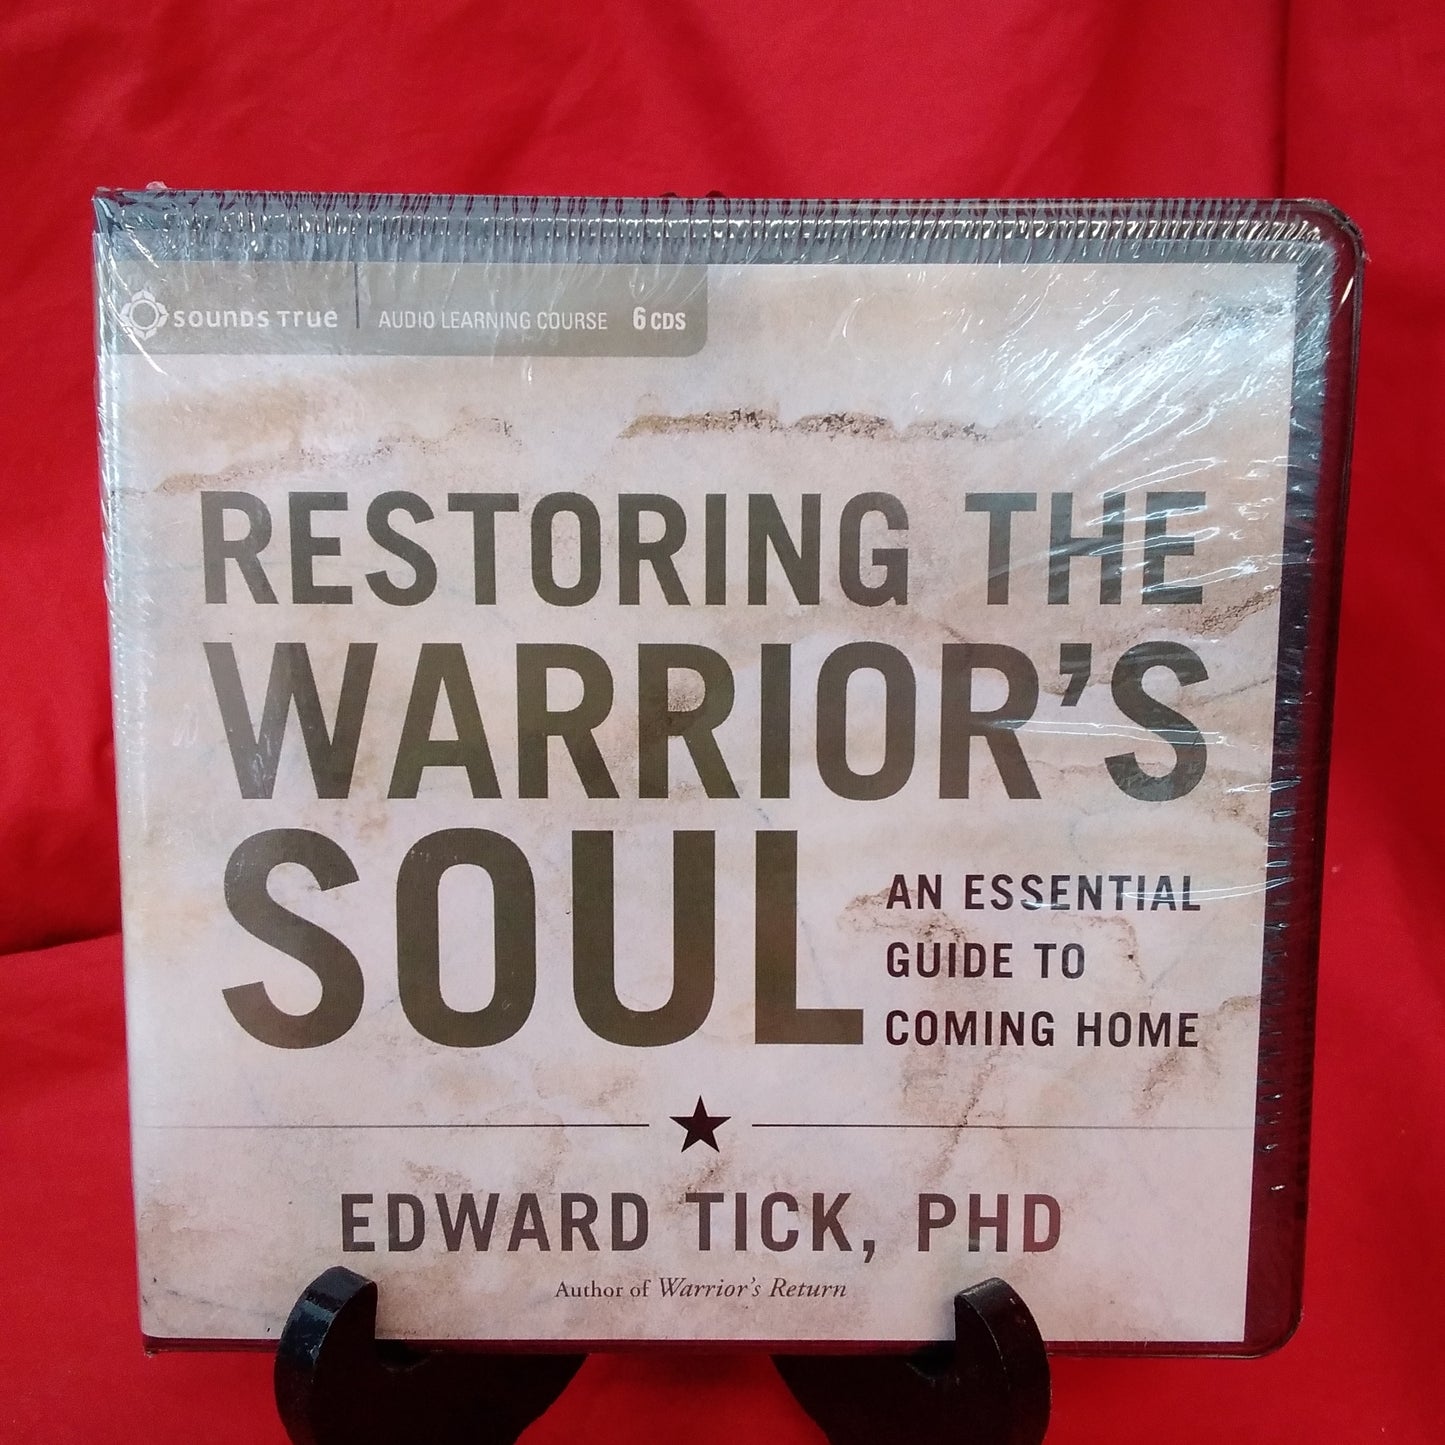 NIB - Restoring The Warrior's Soul: An Essential Guide To Coming Home - Audio Learning Course 6 CD's